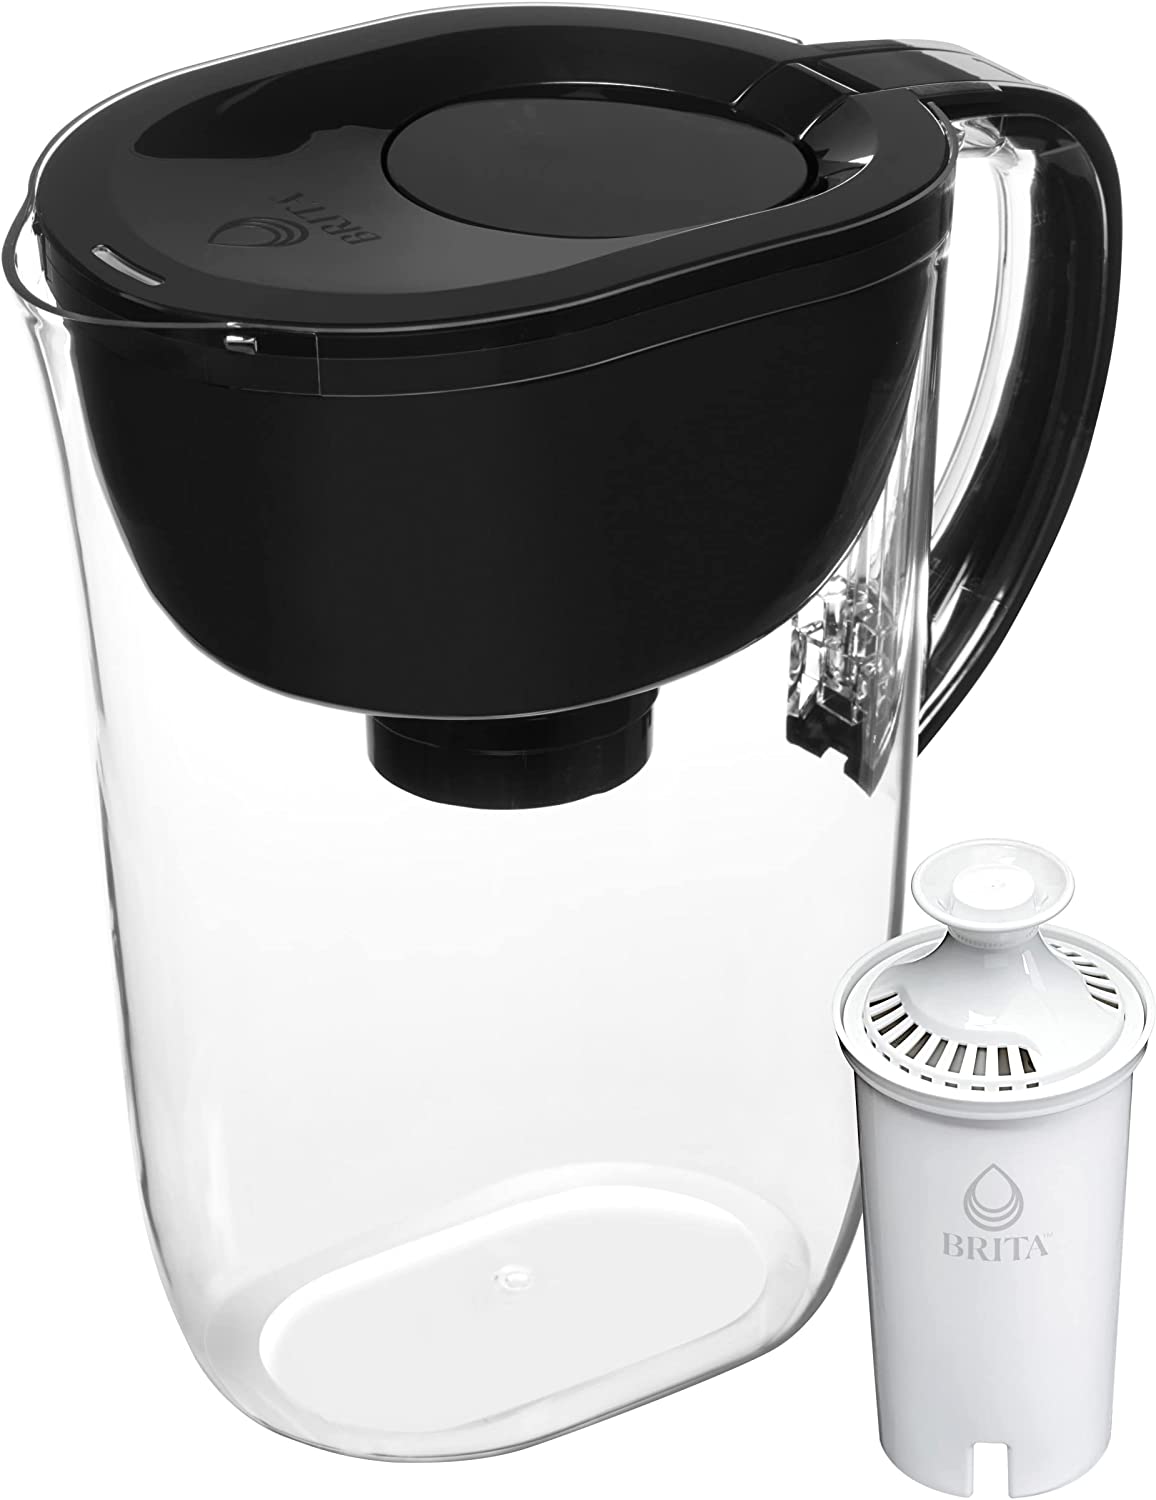 Brita Large Water Filter Pitcher for Tap and Drinking [...]